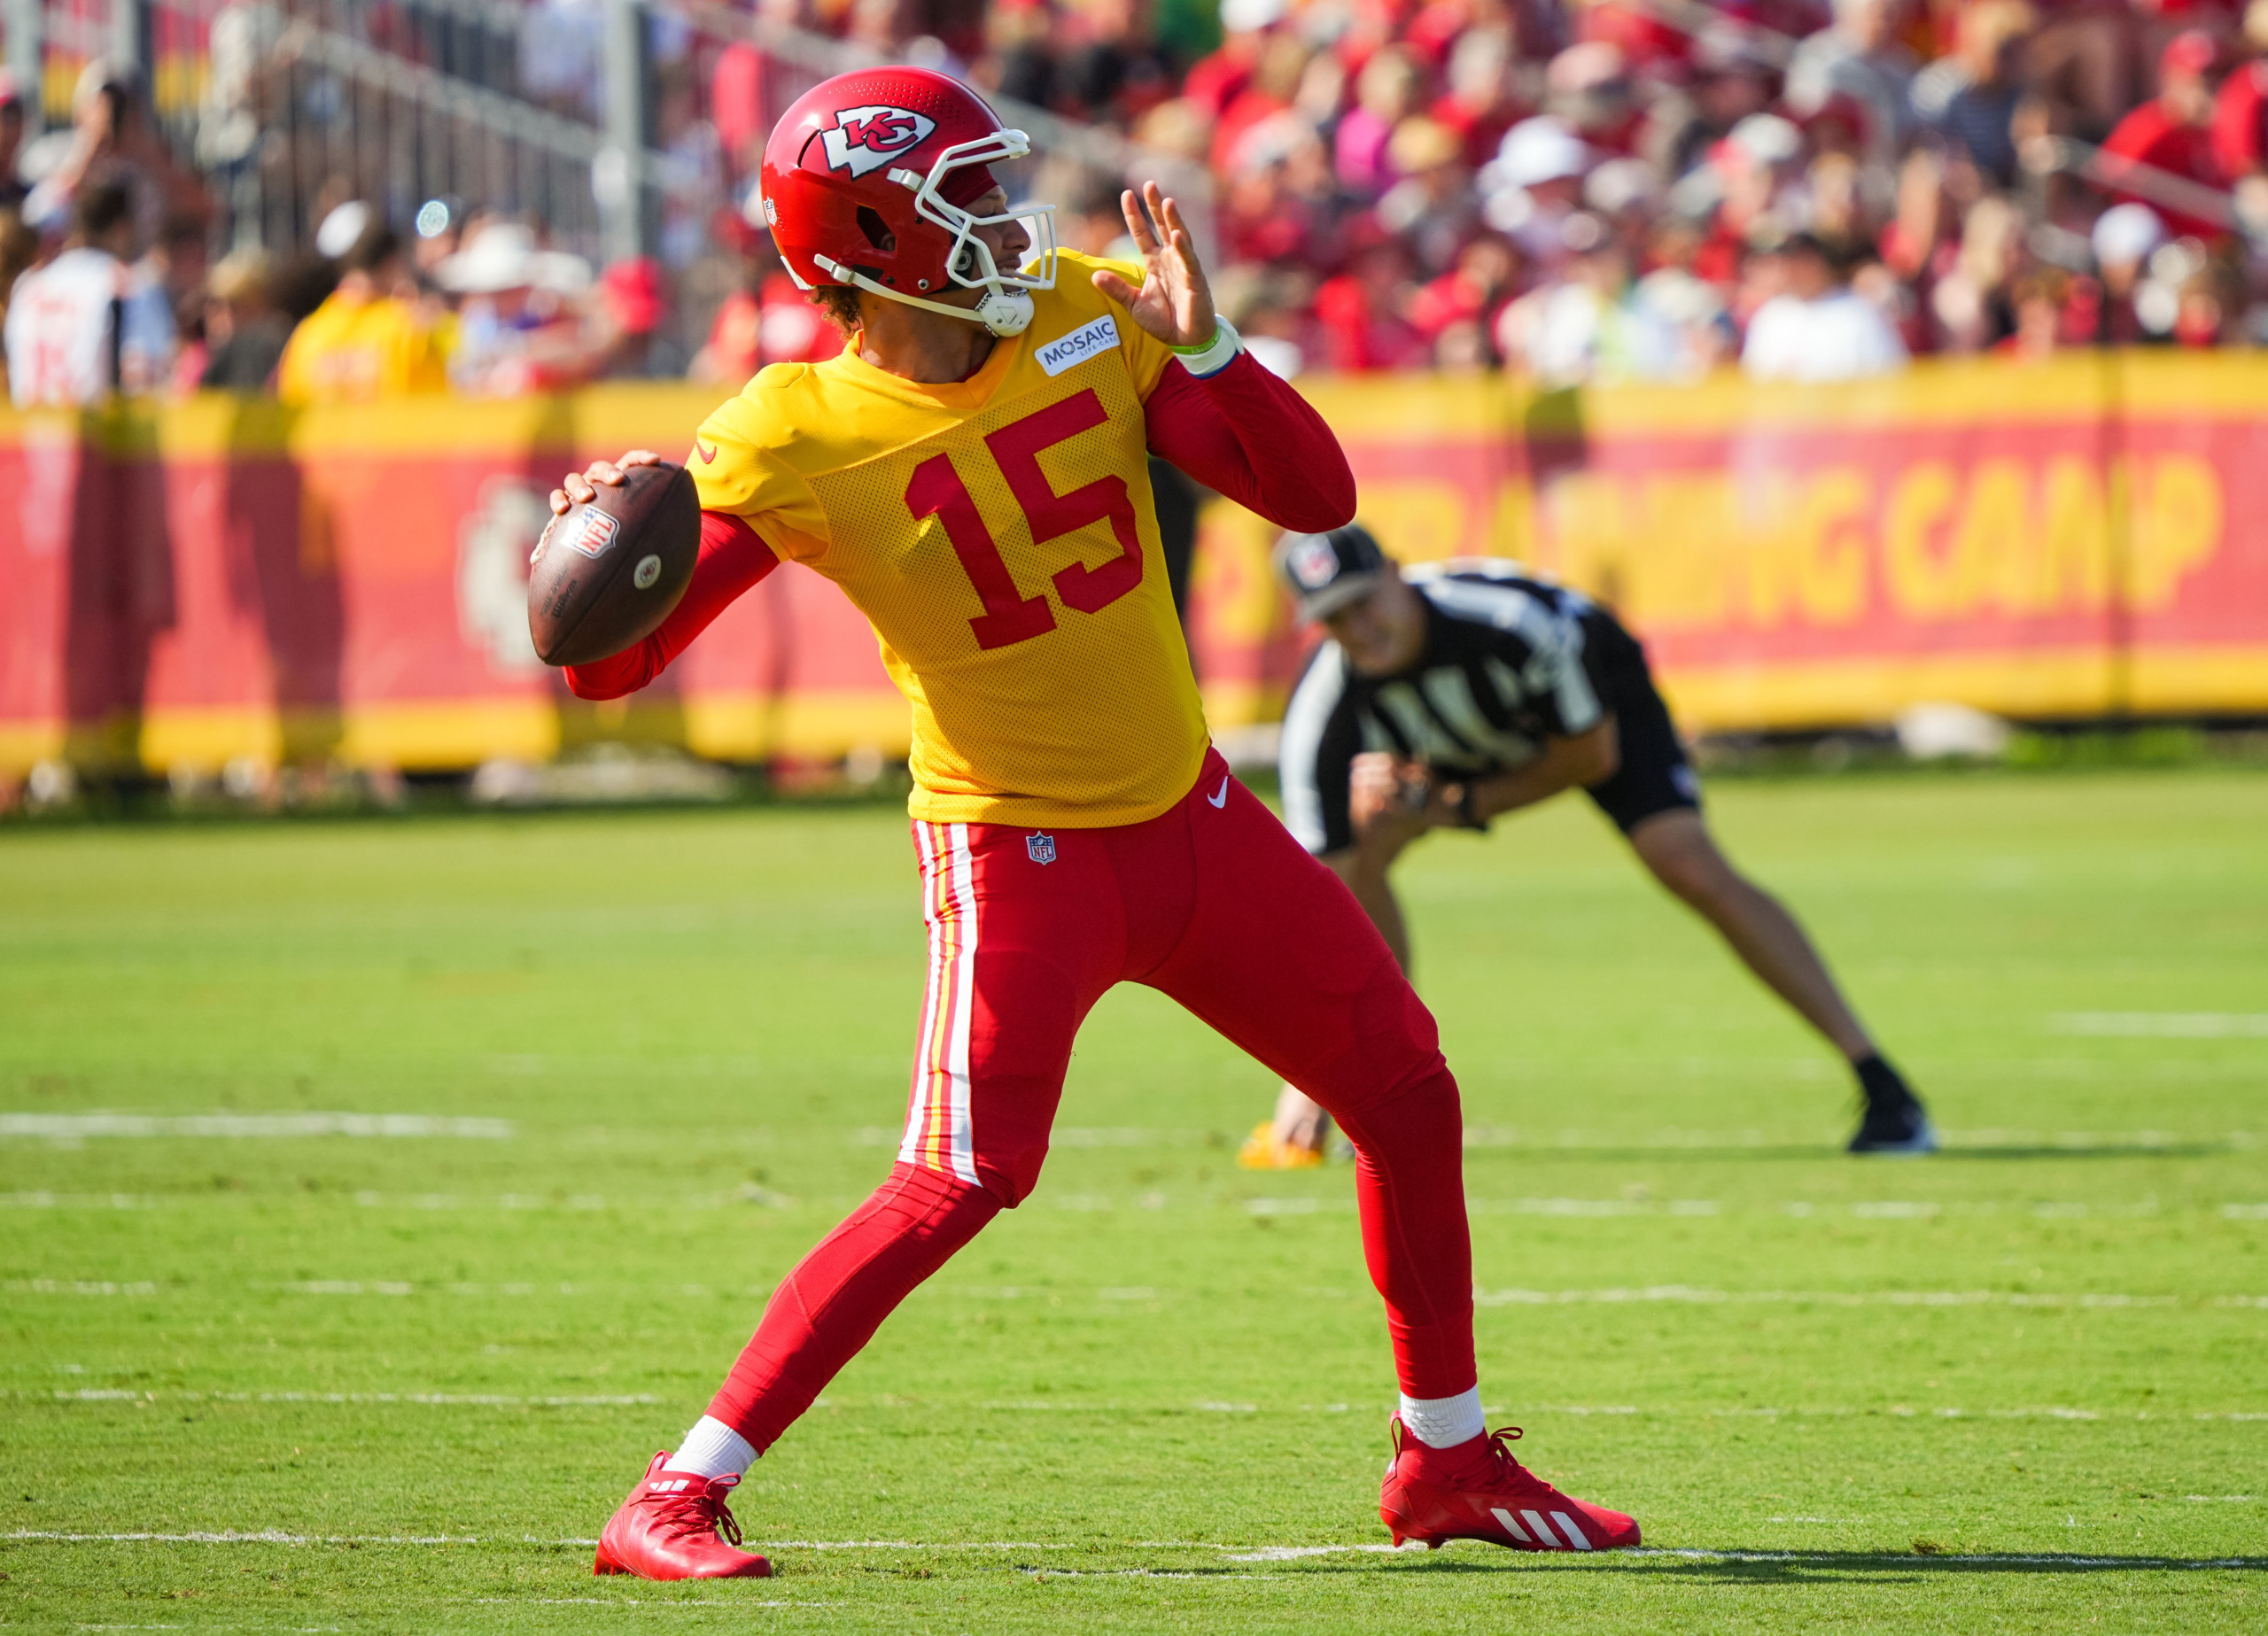 Patrick Mahomes, Joe Burrow featured in NFL's Best 100 Players list, NFL